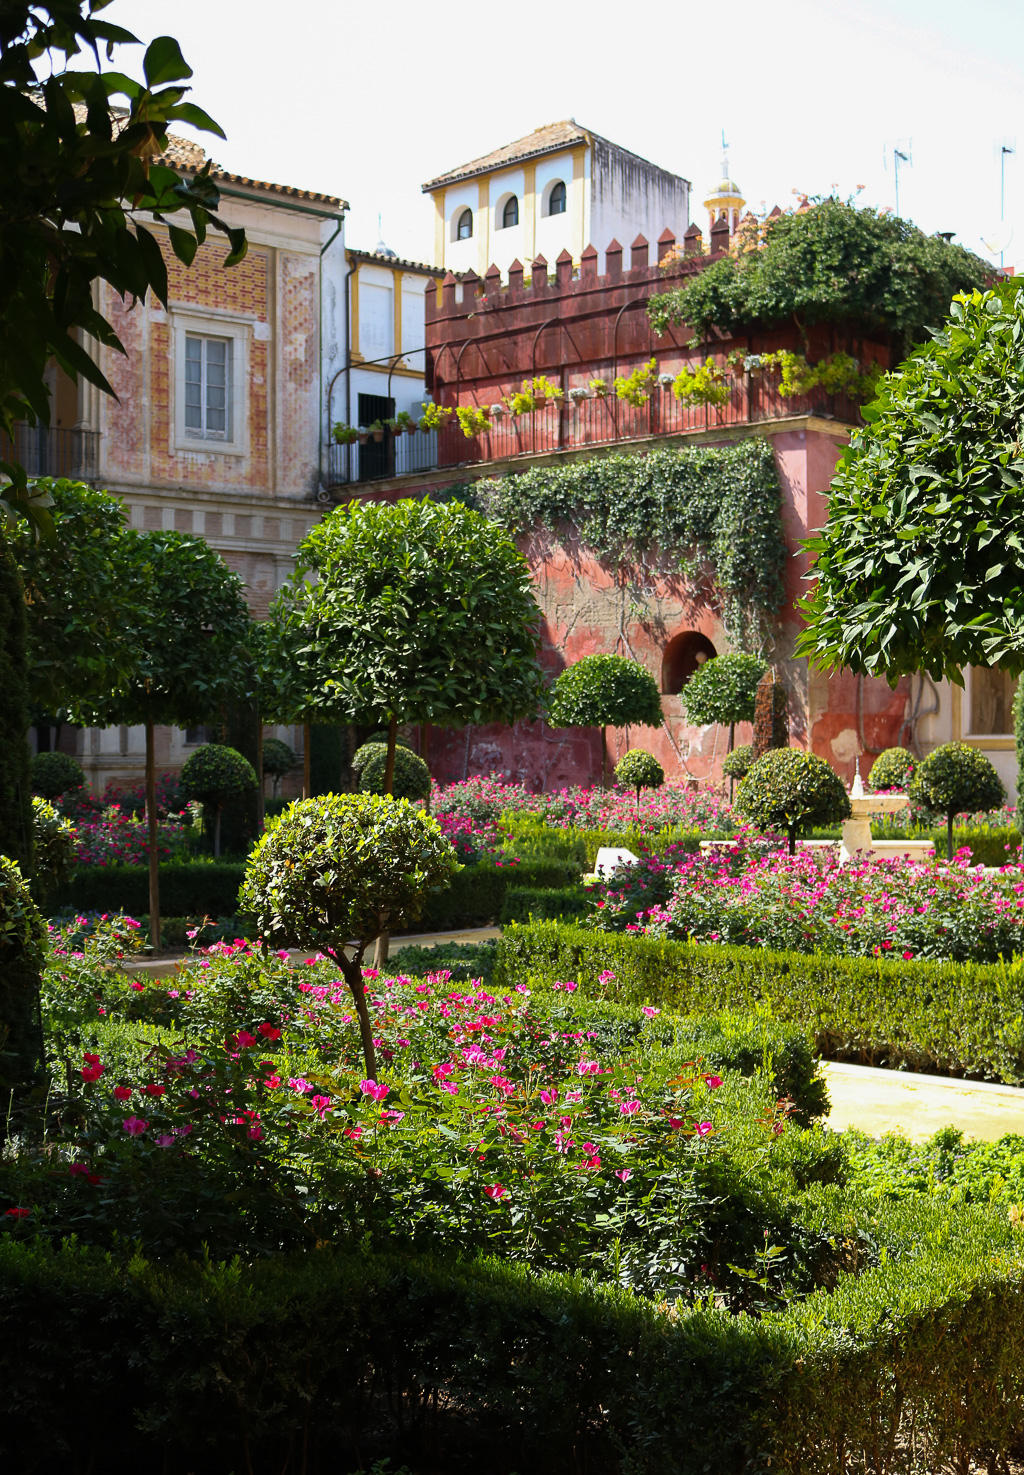 Sometimes, you don't need an itinerary to fully enjoy a new city - Seville, Spain